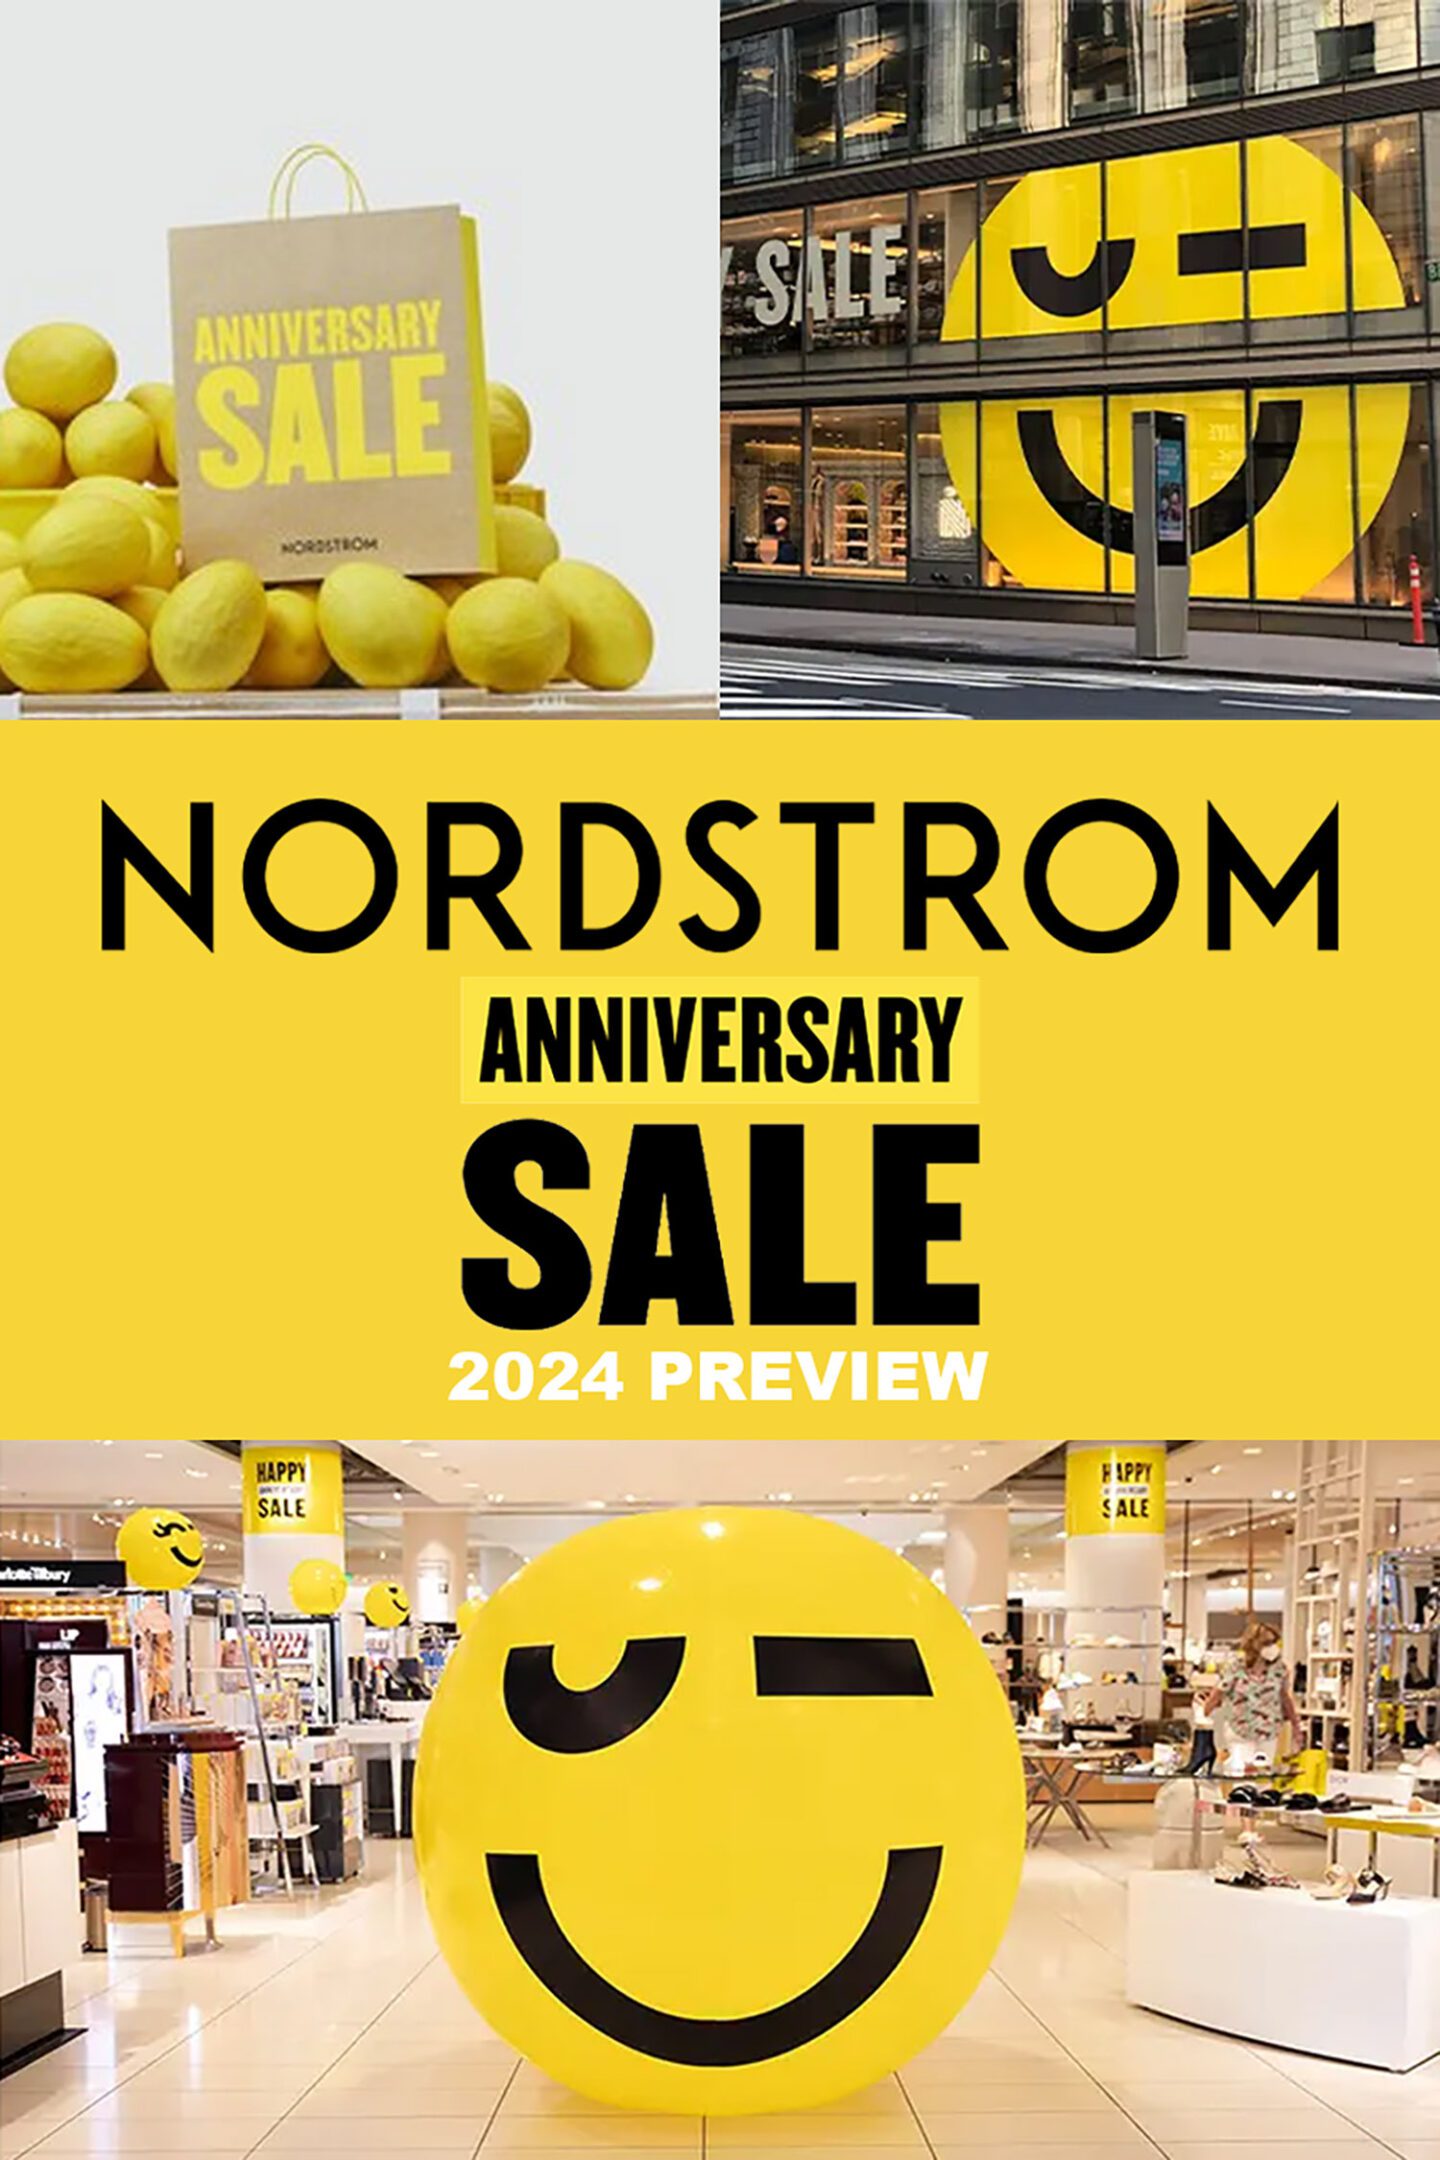 Nordstrom Anniversary Sale 2024 BEAUTY EXCLUSIVES PREVIEW